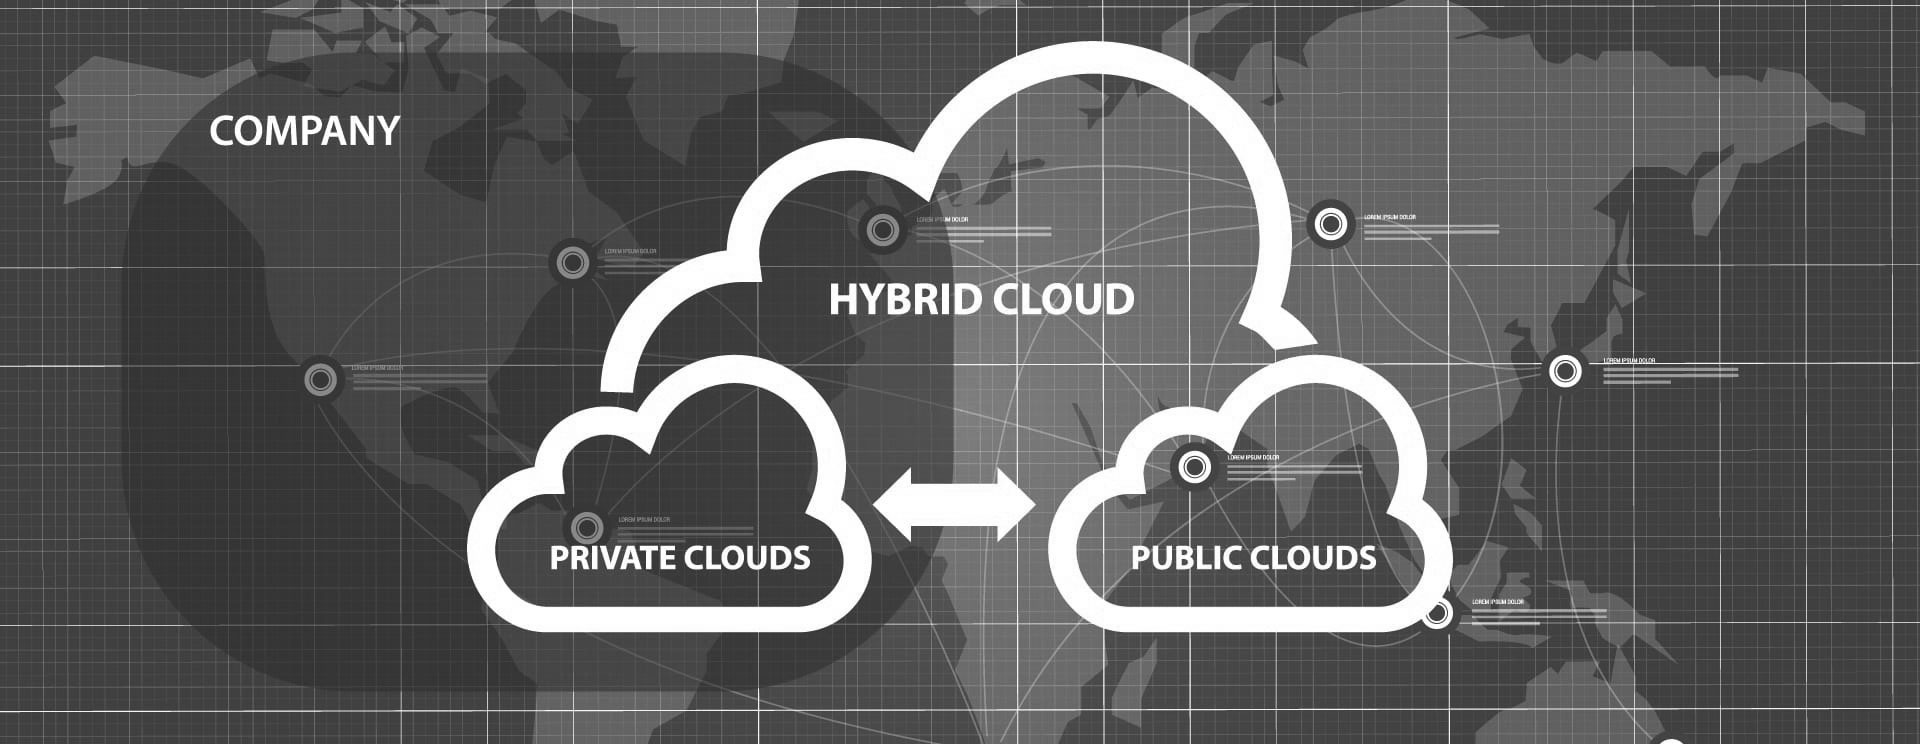 Moving Away from Cloud: Making the Case for Hybrid IT